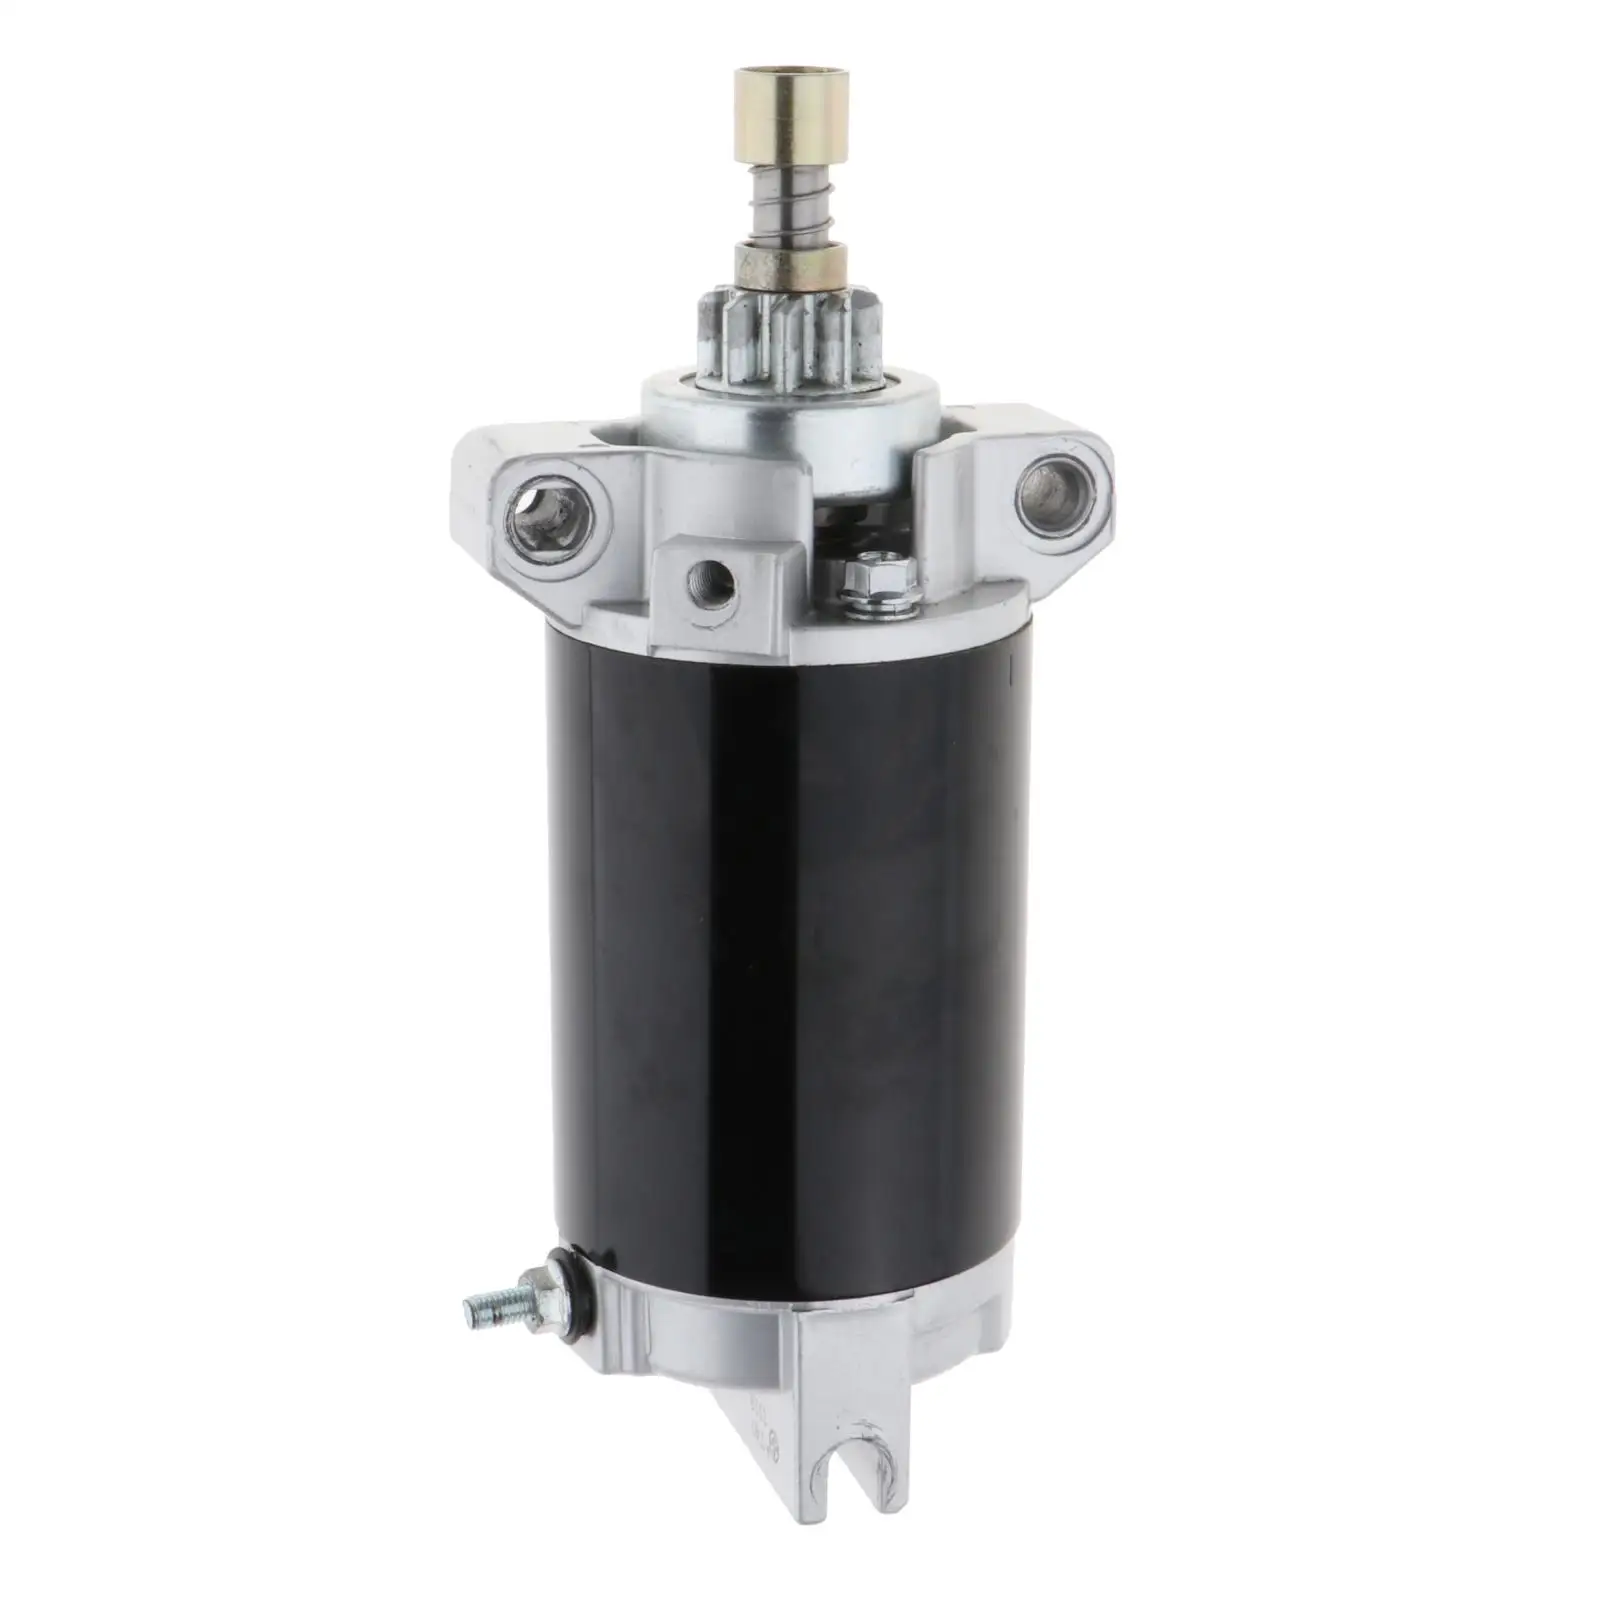 Electric Starter Motor for Yamaha 40HP Outboard Engine - $129.74